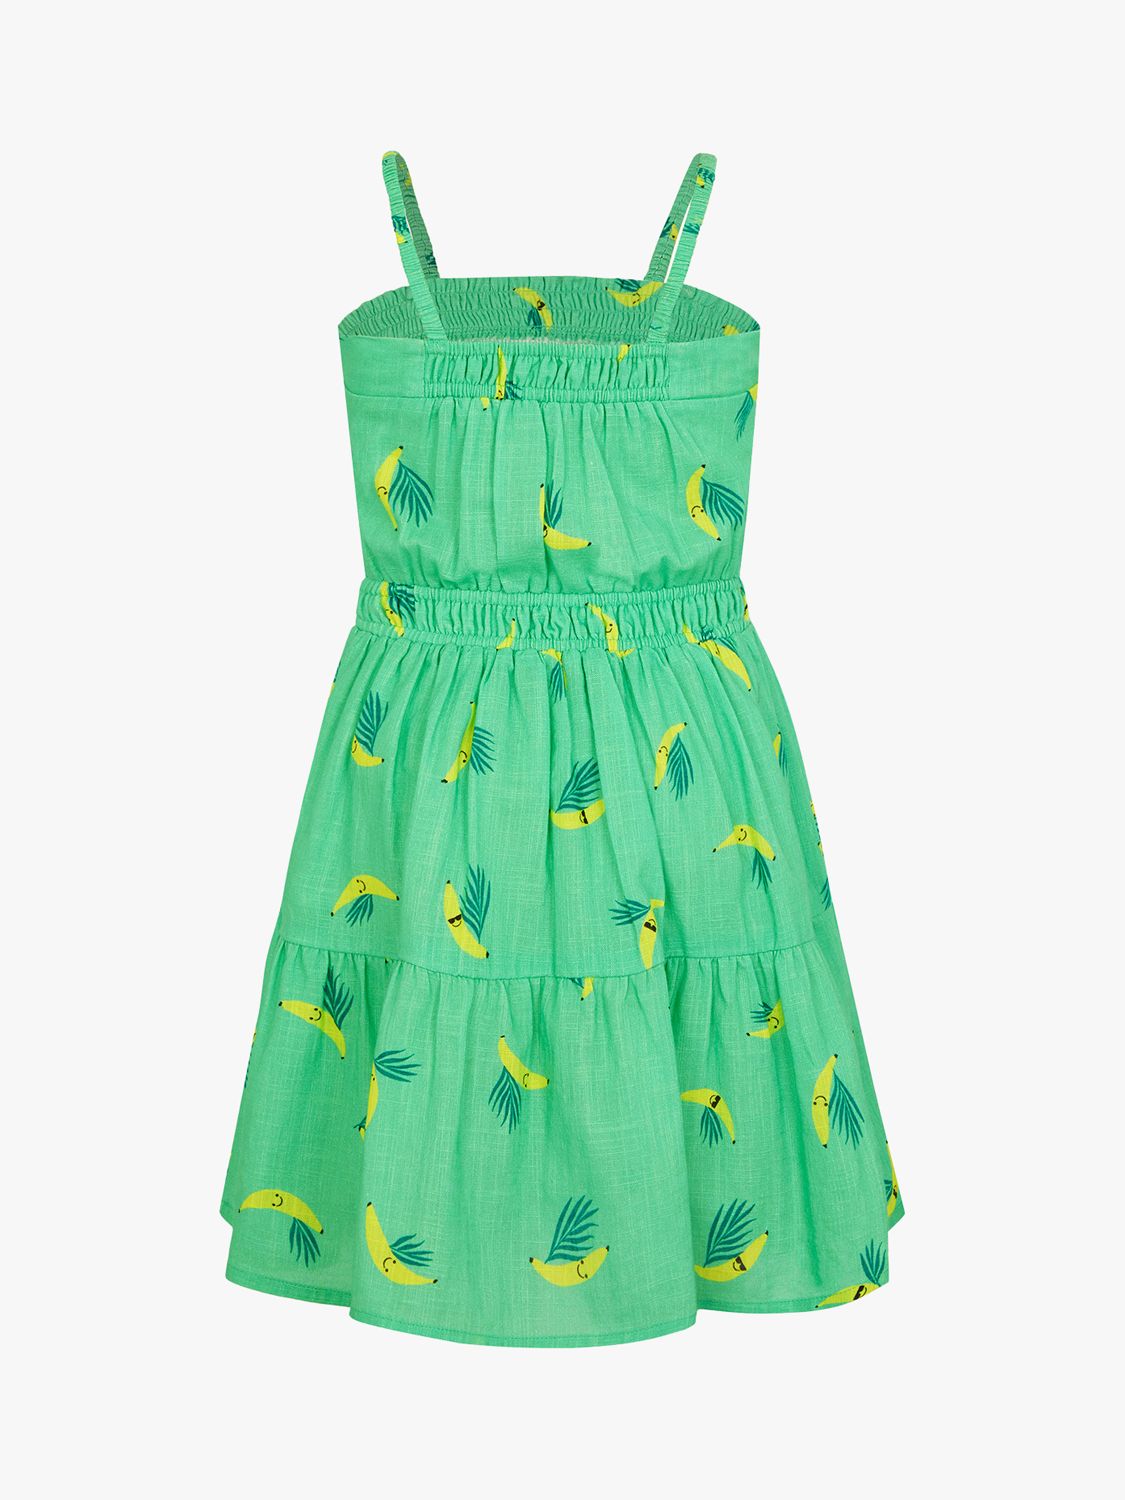 Angels by Accessorize Kids' Banana Print Tiered Dress, Green, 18-24 months